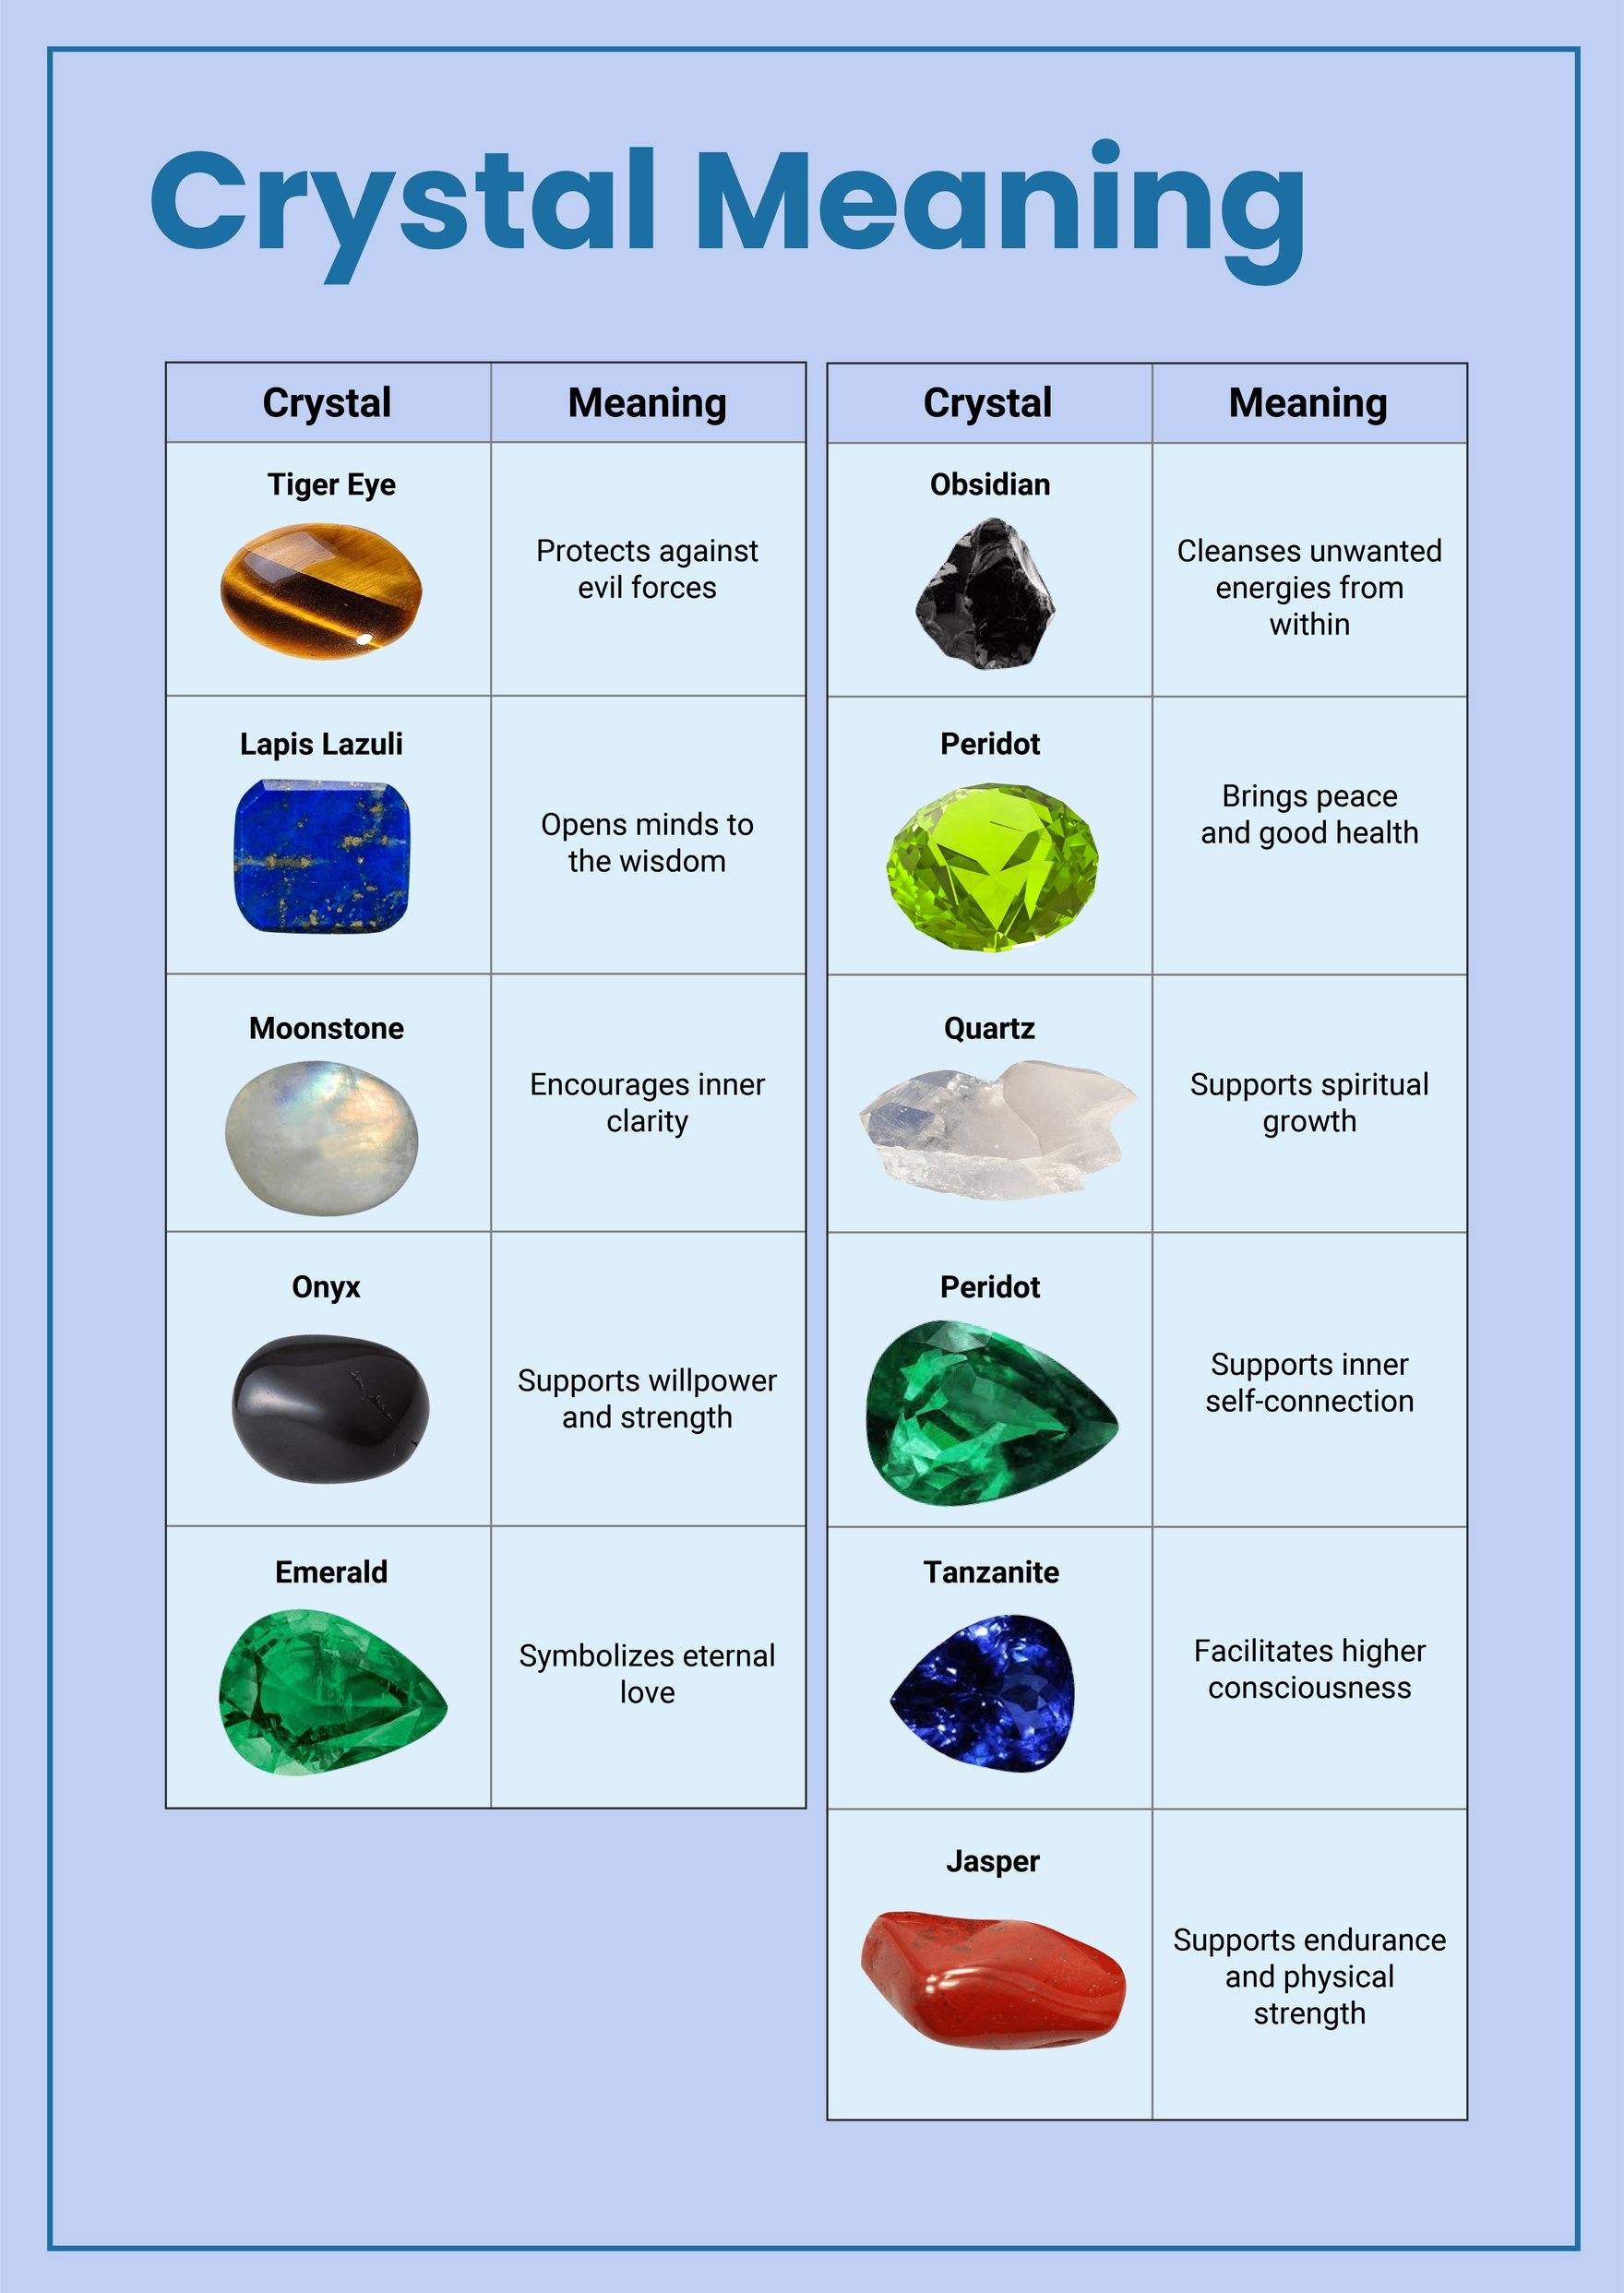 Crystal Meaning Chart in PDF, Illustrator